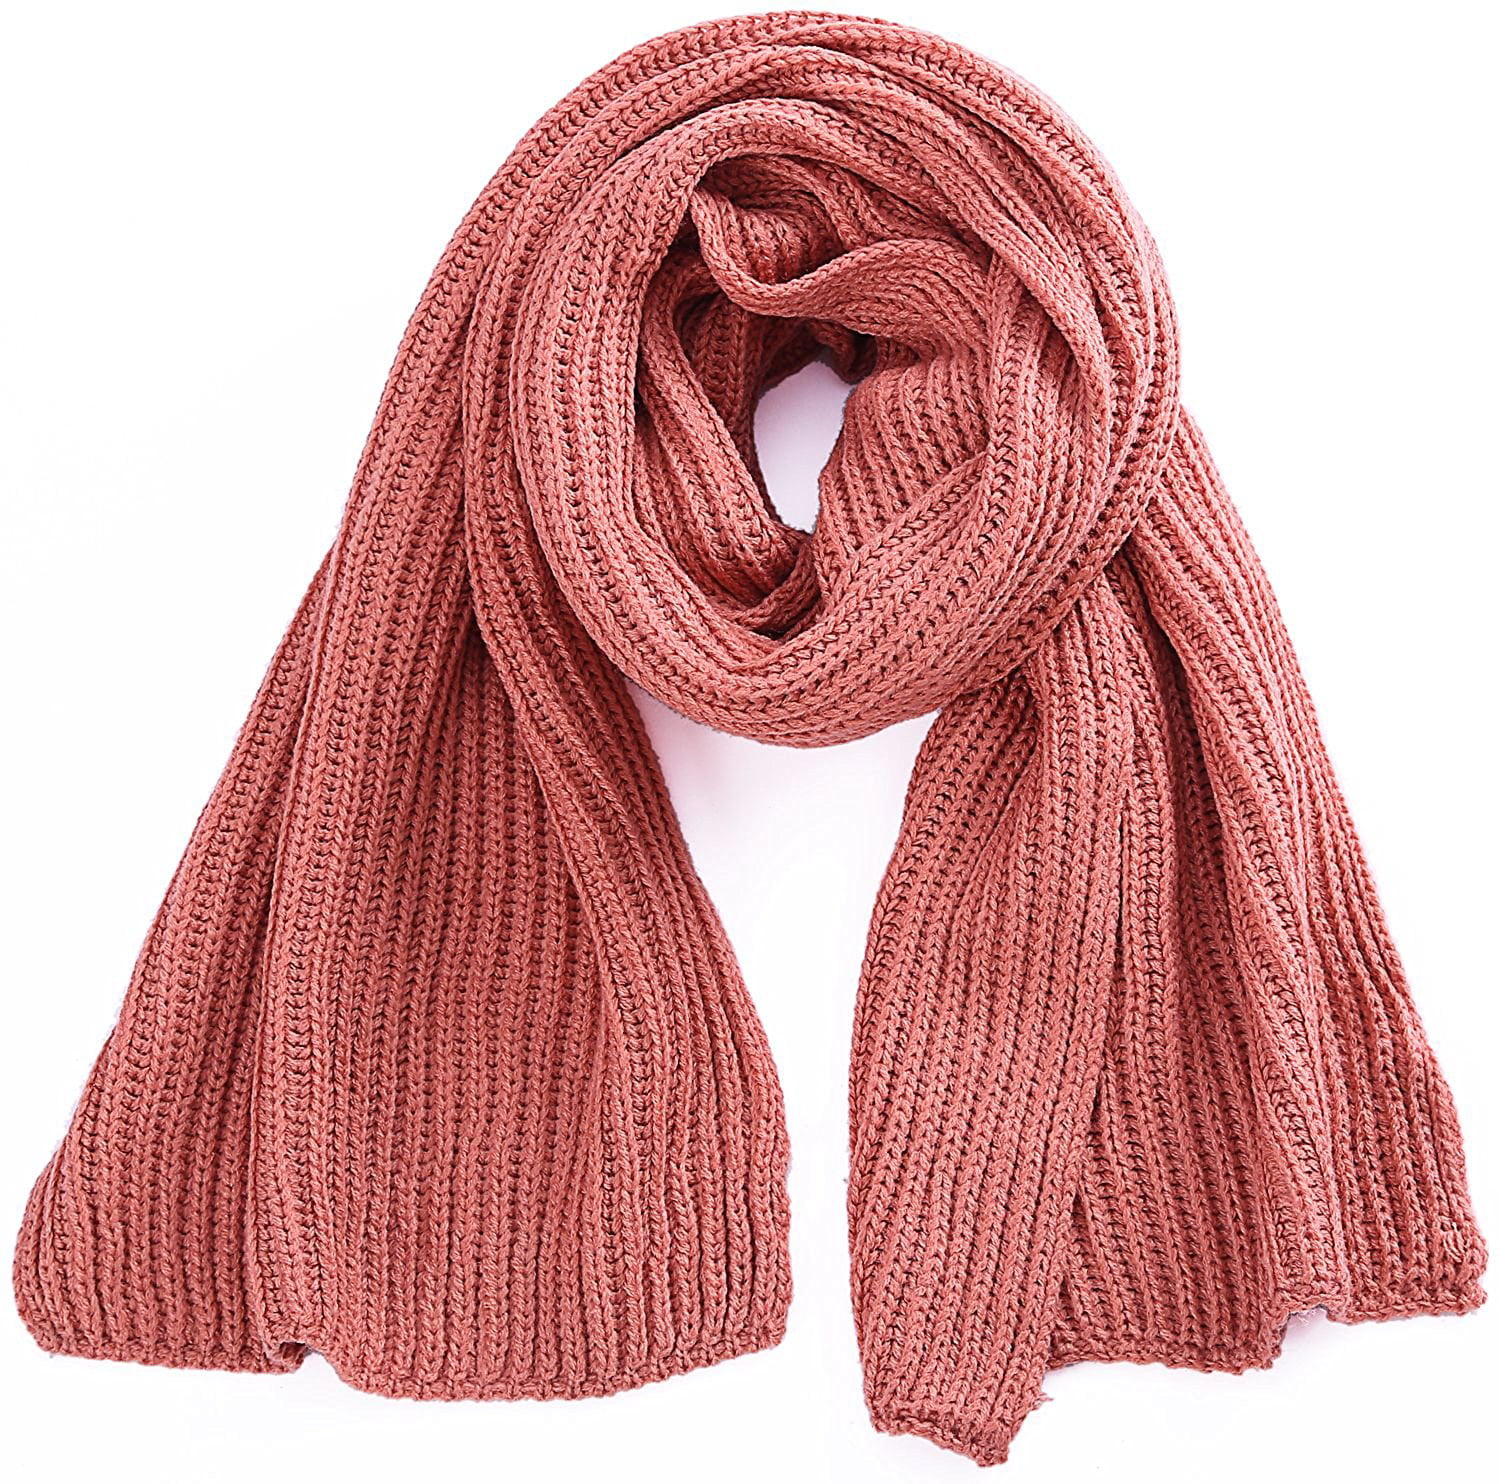 Soft Winter Scarves Warm Knit Scarves For Outdoor Knitted Womens Scarves 